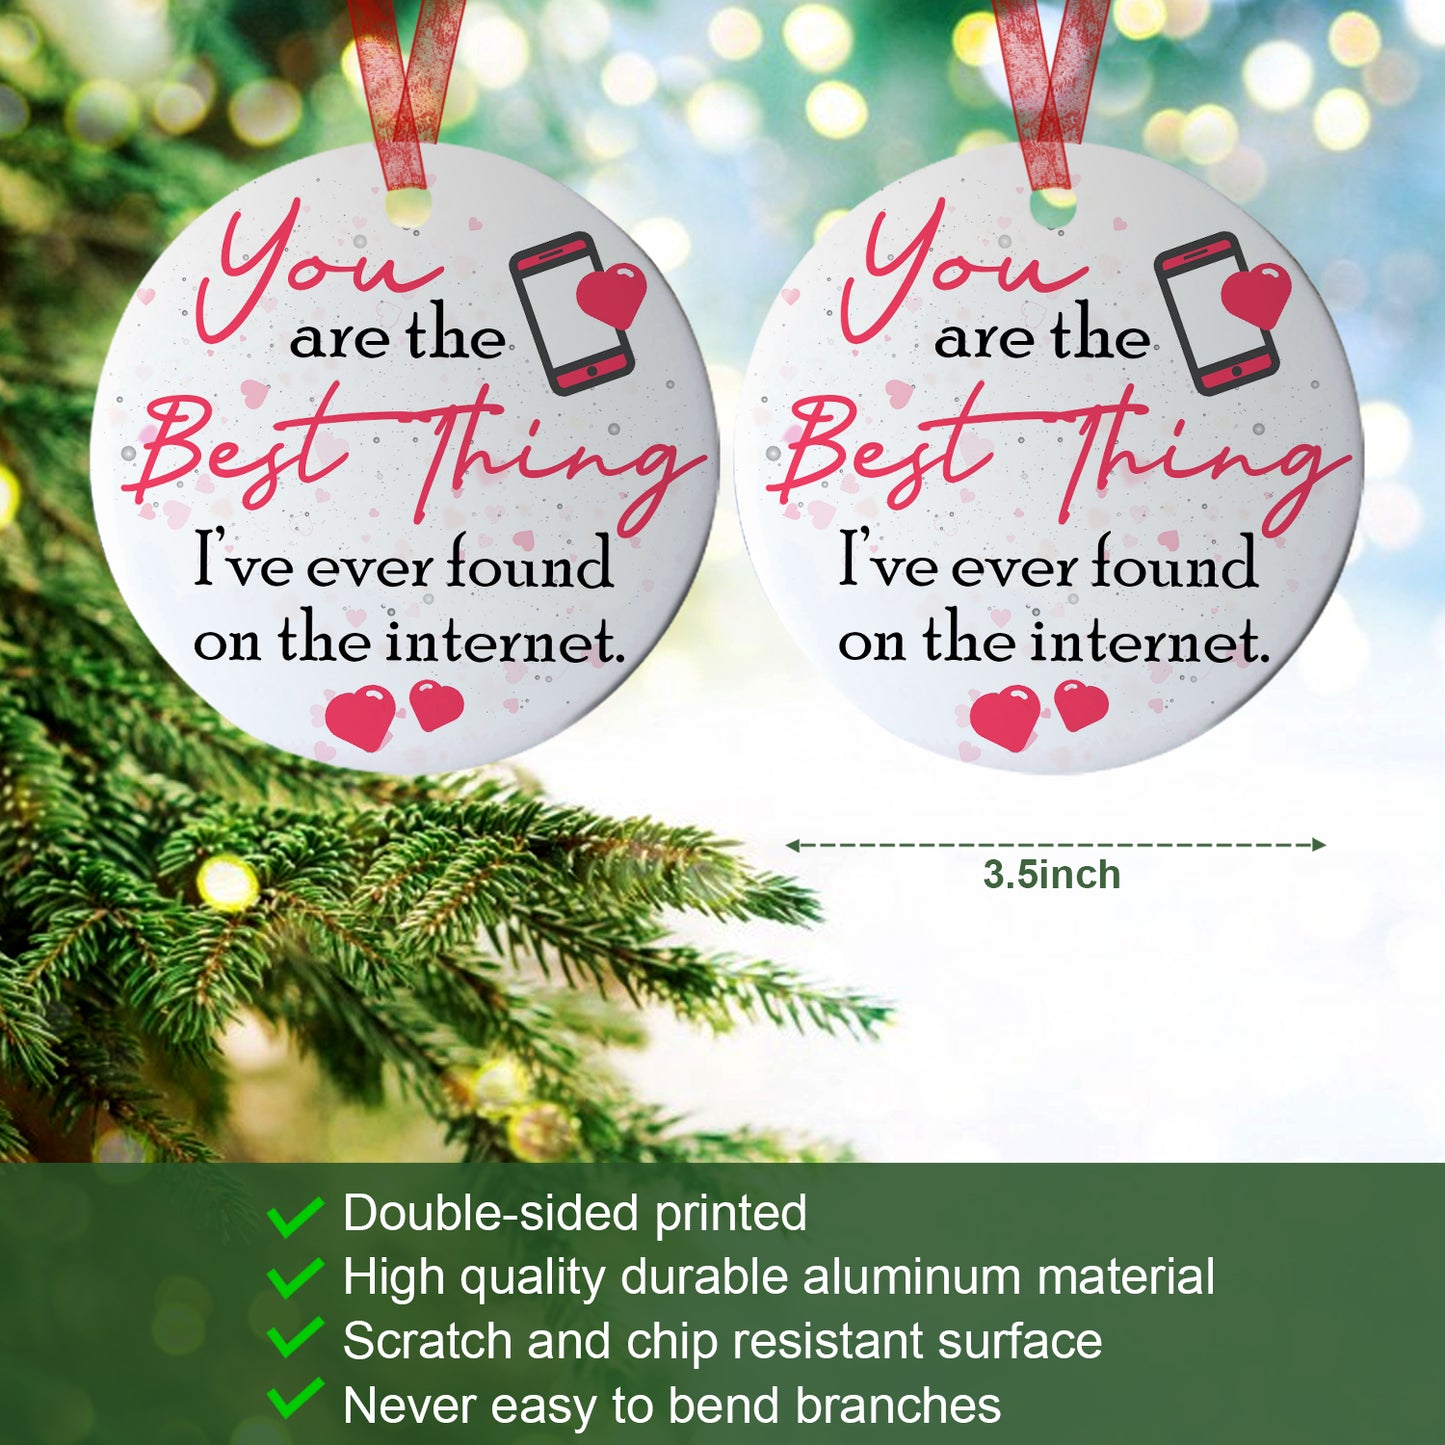 Dating Online Ornament You Are The Best Thing I Found On The Internet Ornament, Gift For Couple Girlfriend Wife- Aluminum Metal Ornament- Valentine's Day Internet Dating Gift, Online Dating Present